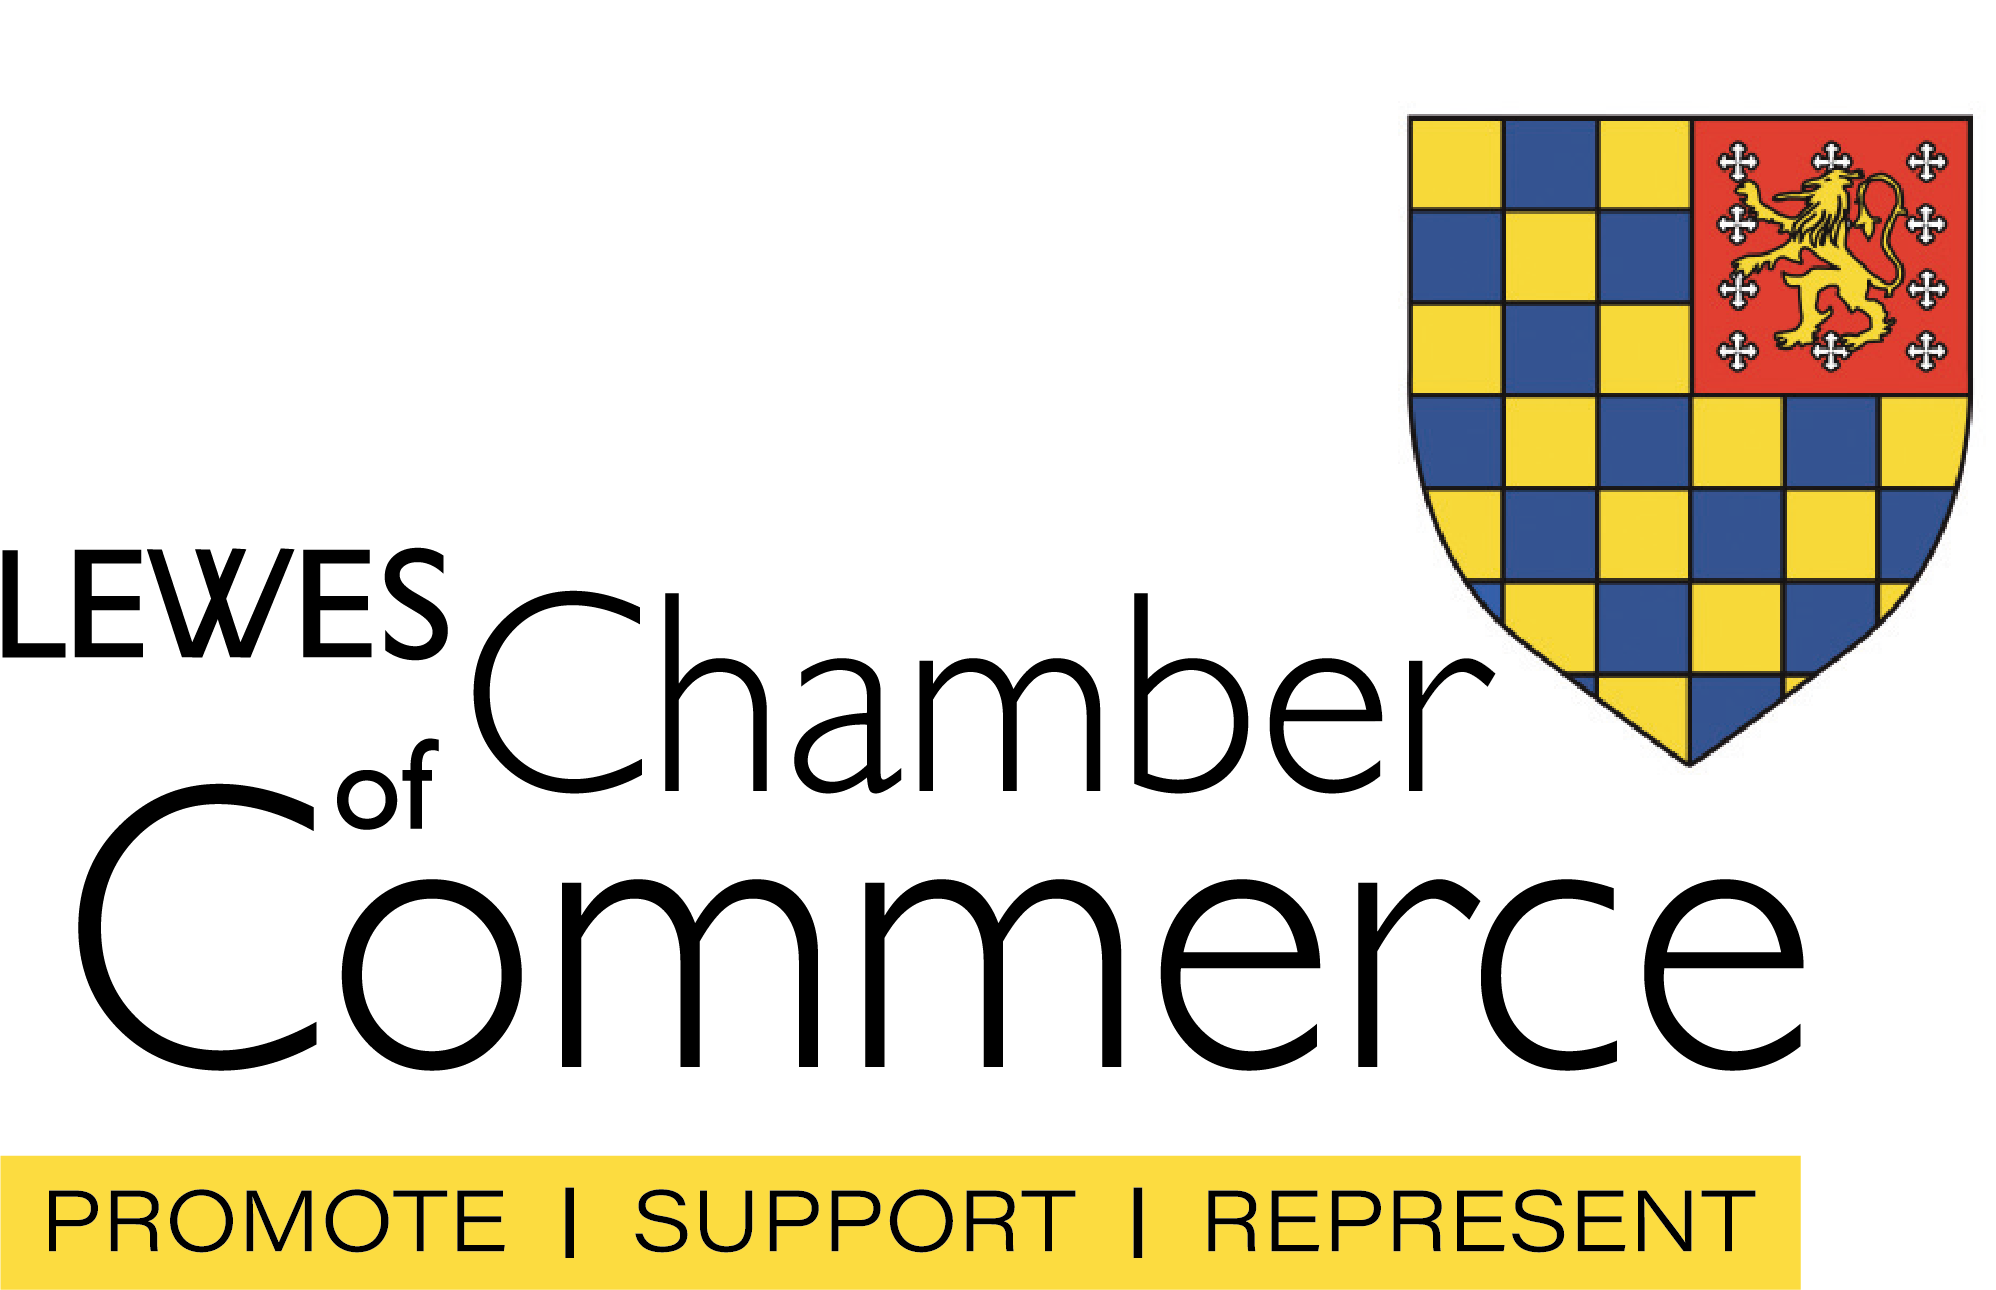 Lewes Chamber of Commerce